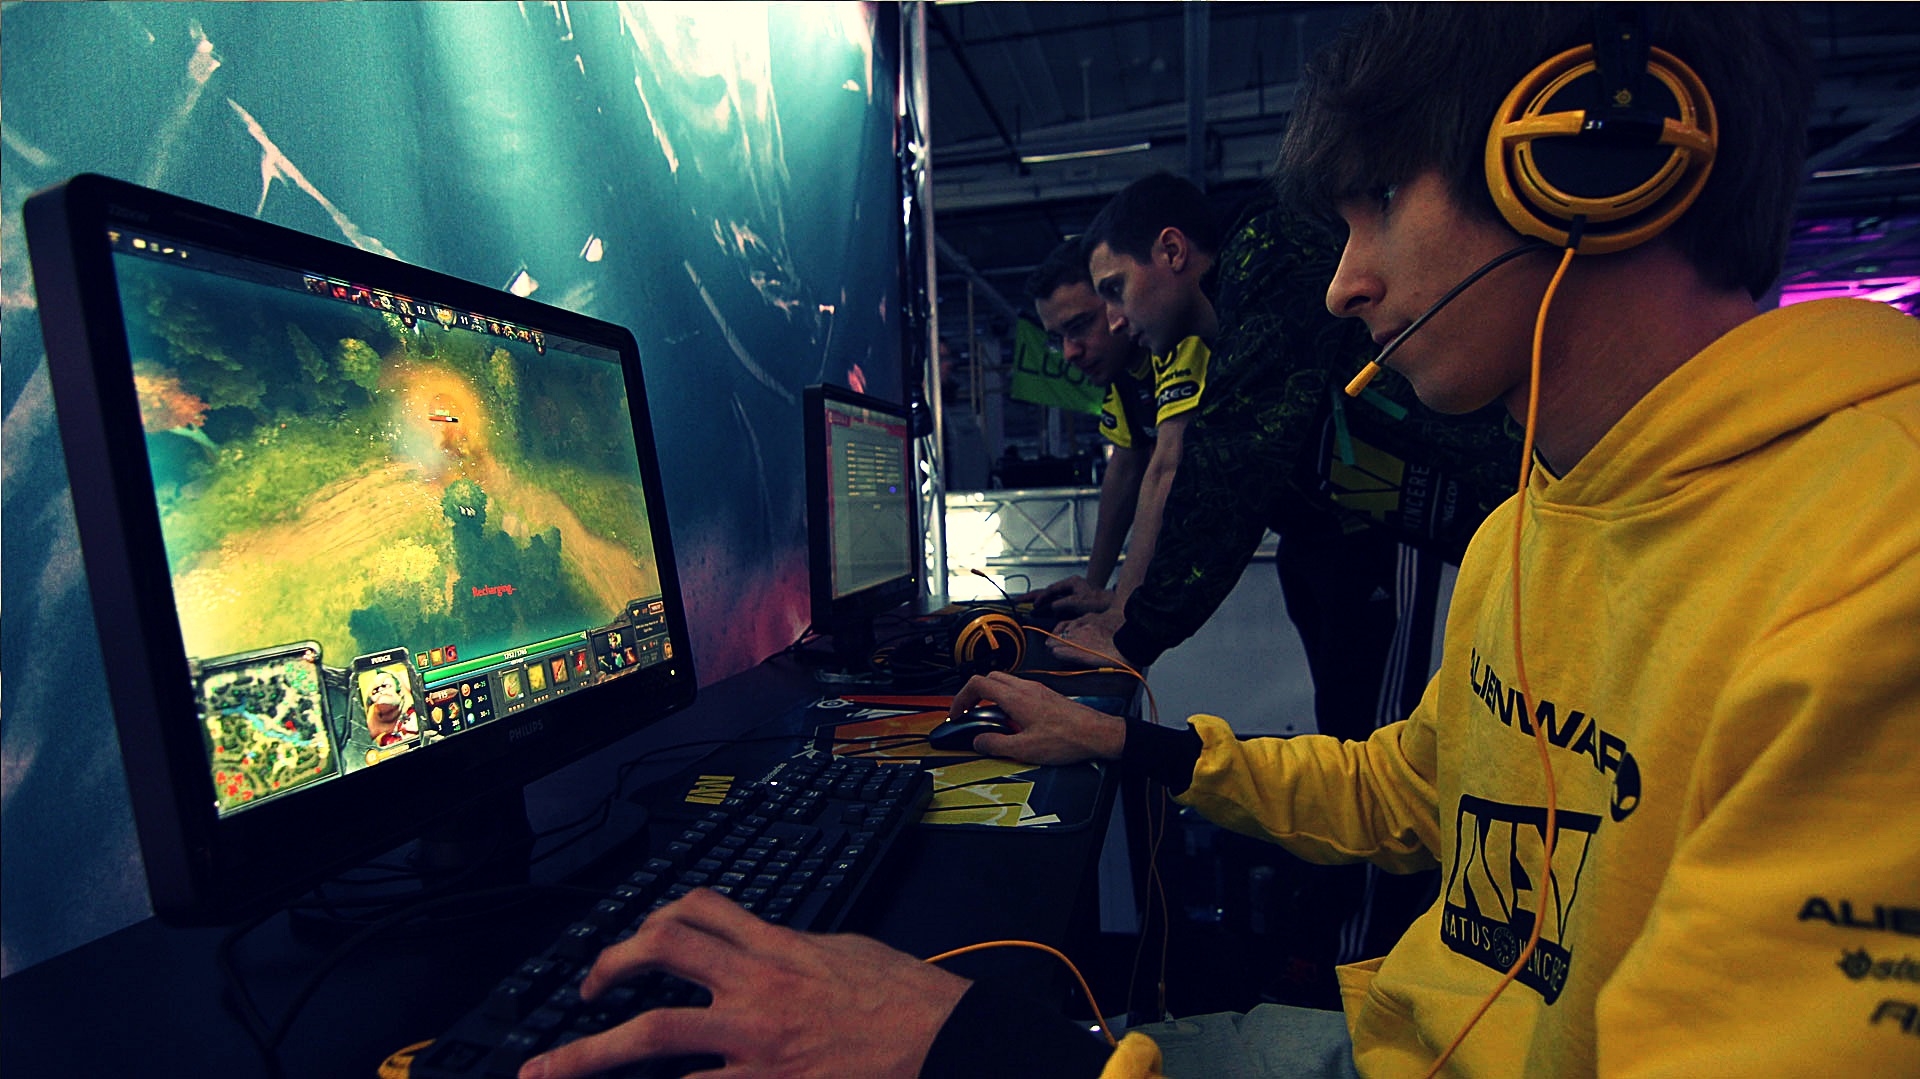 Danylo Ishutin plays "Dota 2" at DreamHack international tournament in Sweden in summer of 2012. The NaVi team became second in the "Dota 2" competition back then, letting German e-sport organization Mortal Team Work take the first place. 